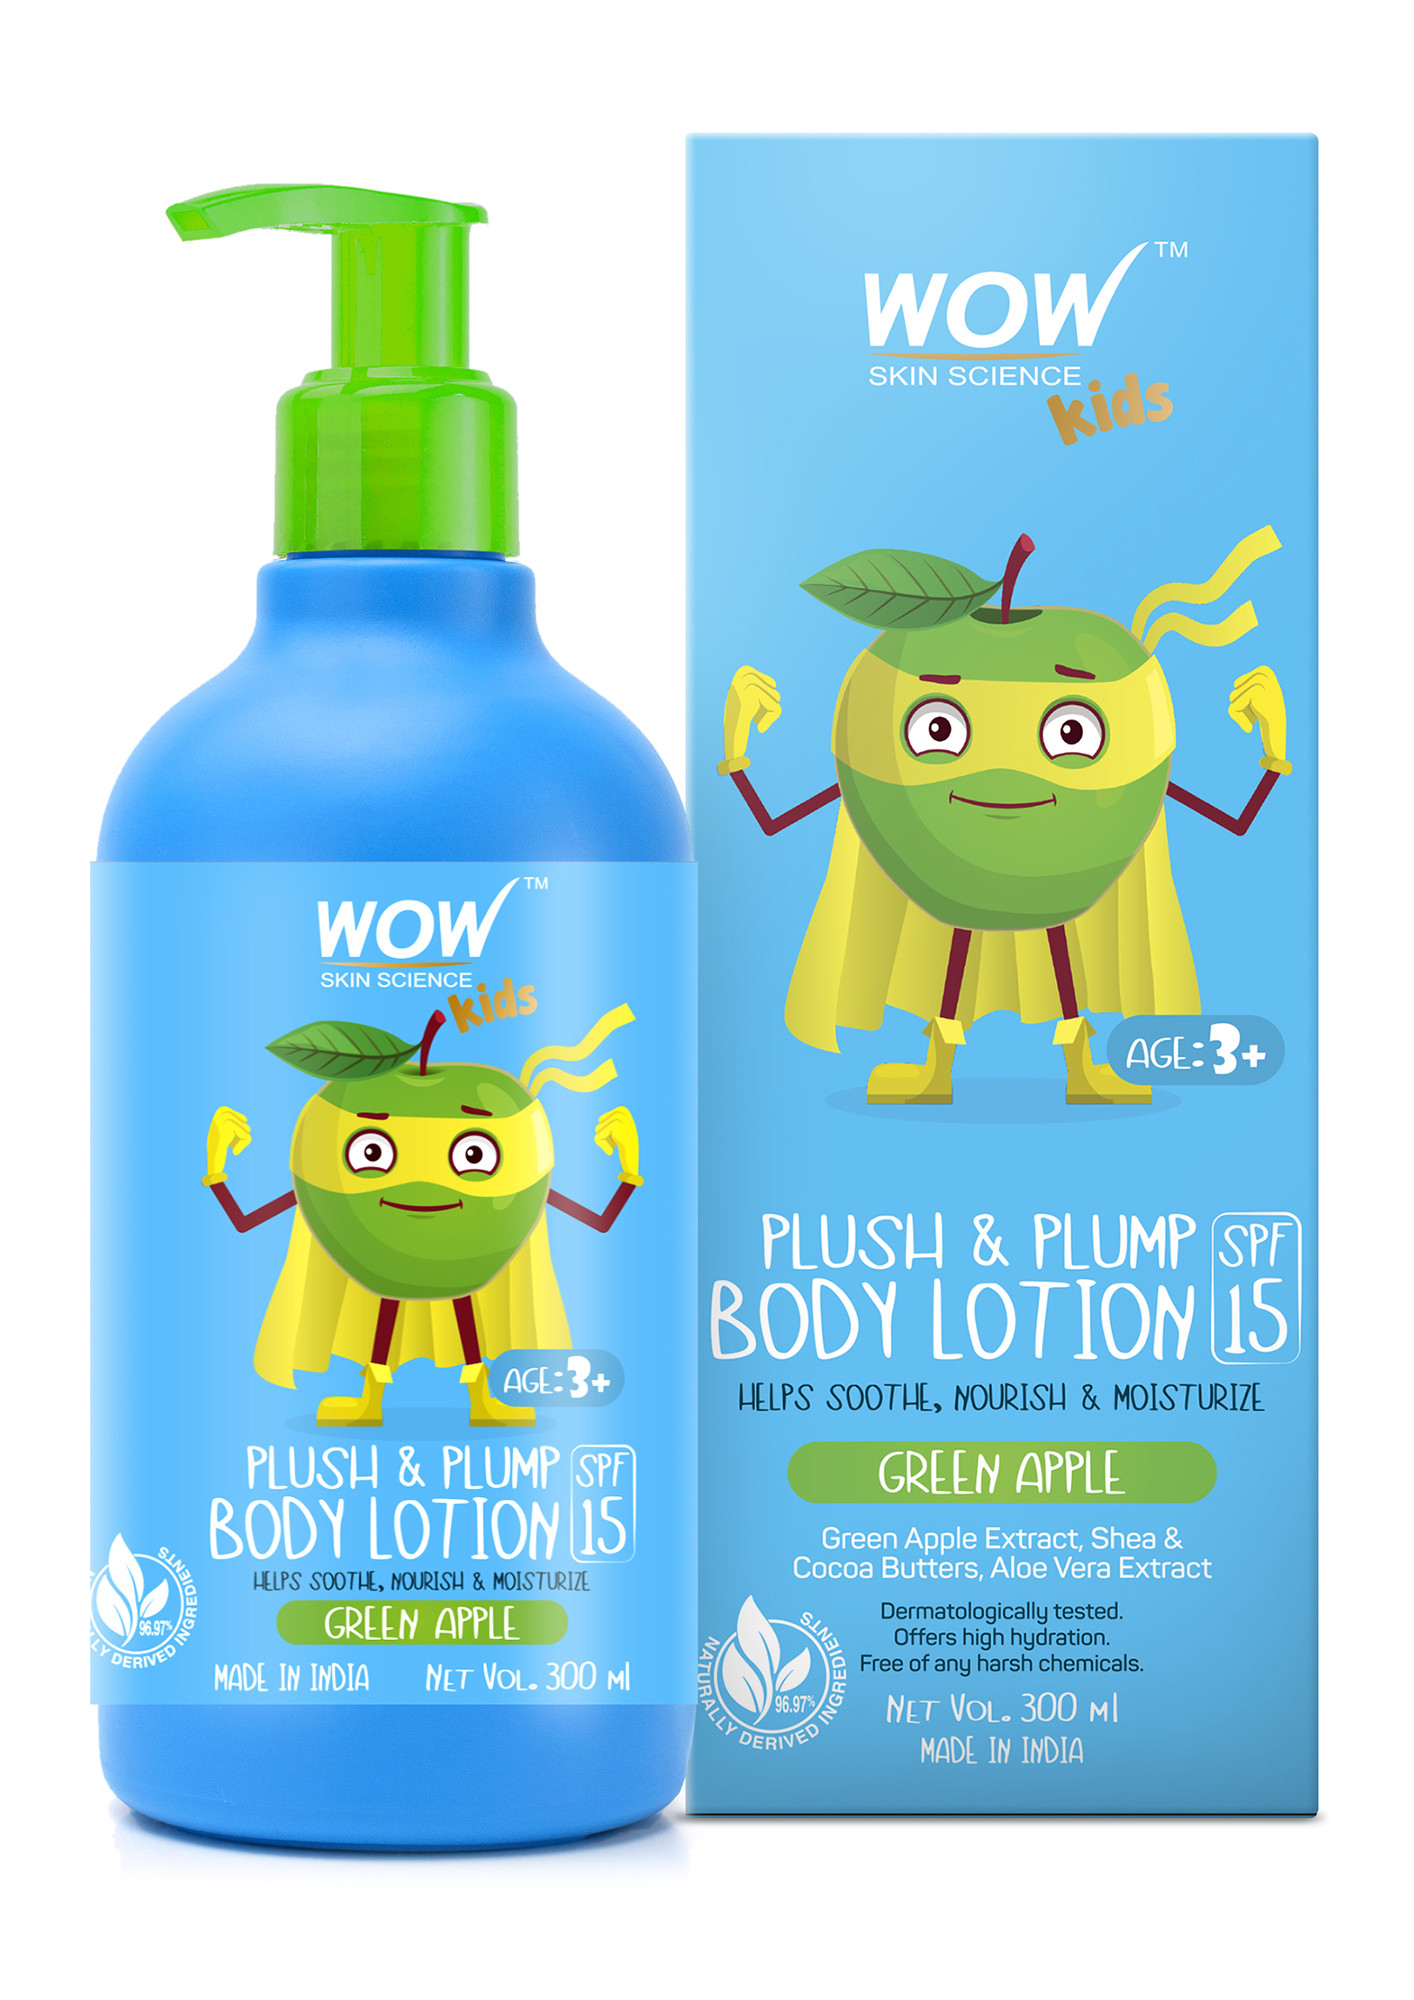 WOW Skin Science Kids Plush & Plump Body Lotion - Green Apple - SPF 15 - No Parabens, Mineral Oil, Silicones & Color - 300mL